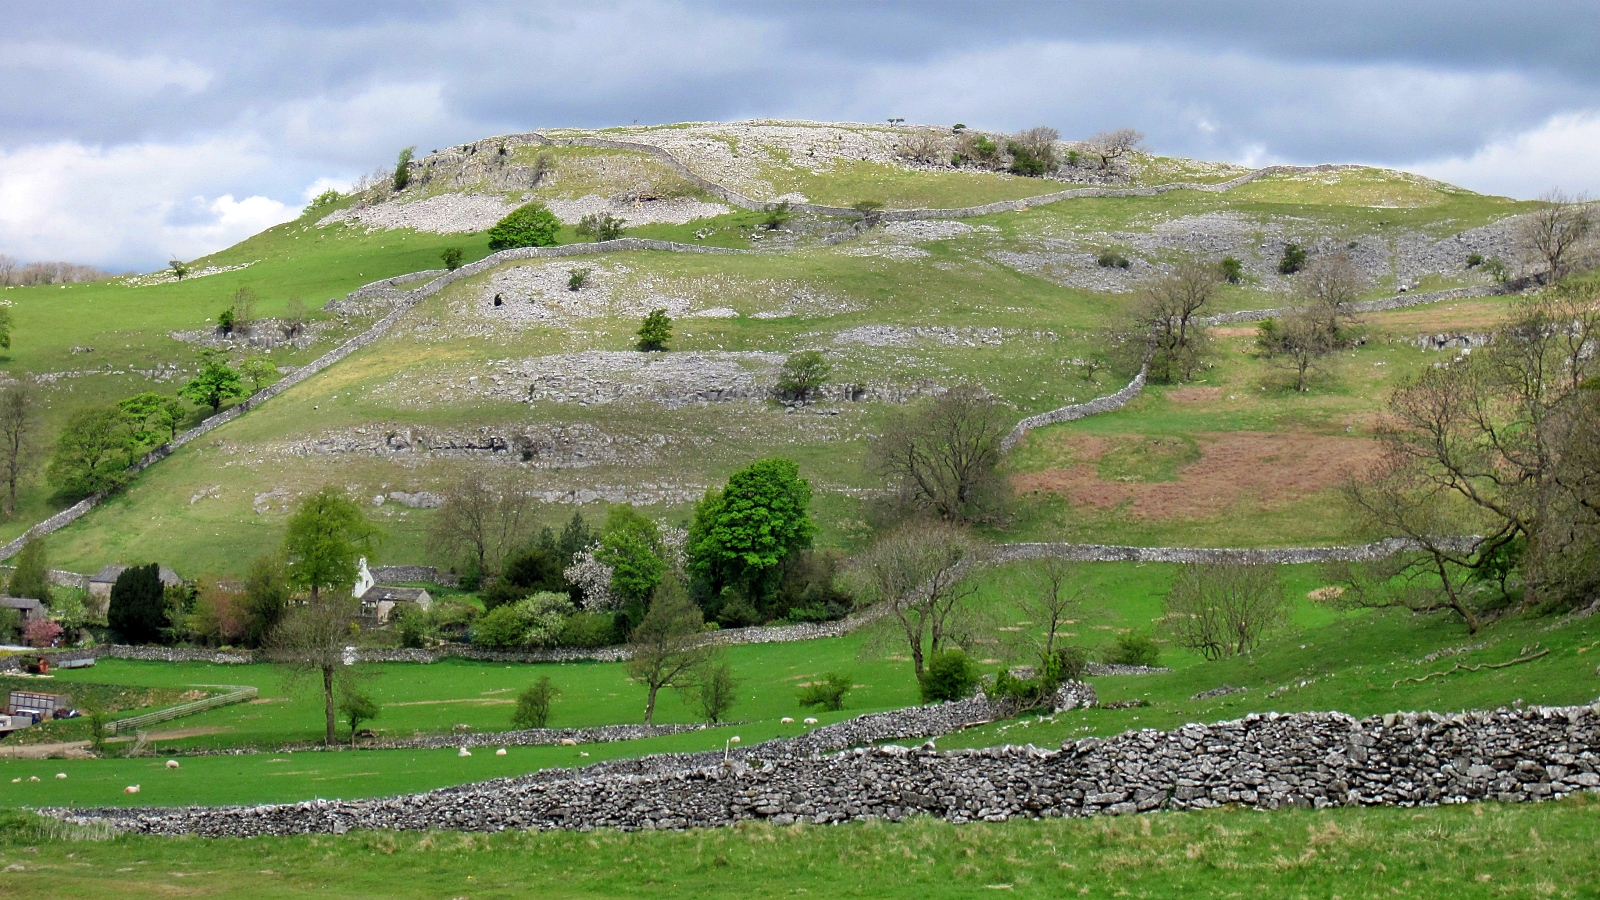 Walking in the Yorkshire Dales